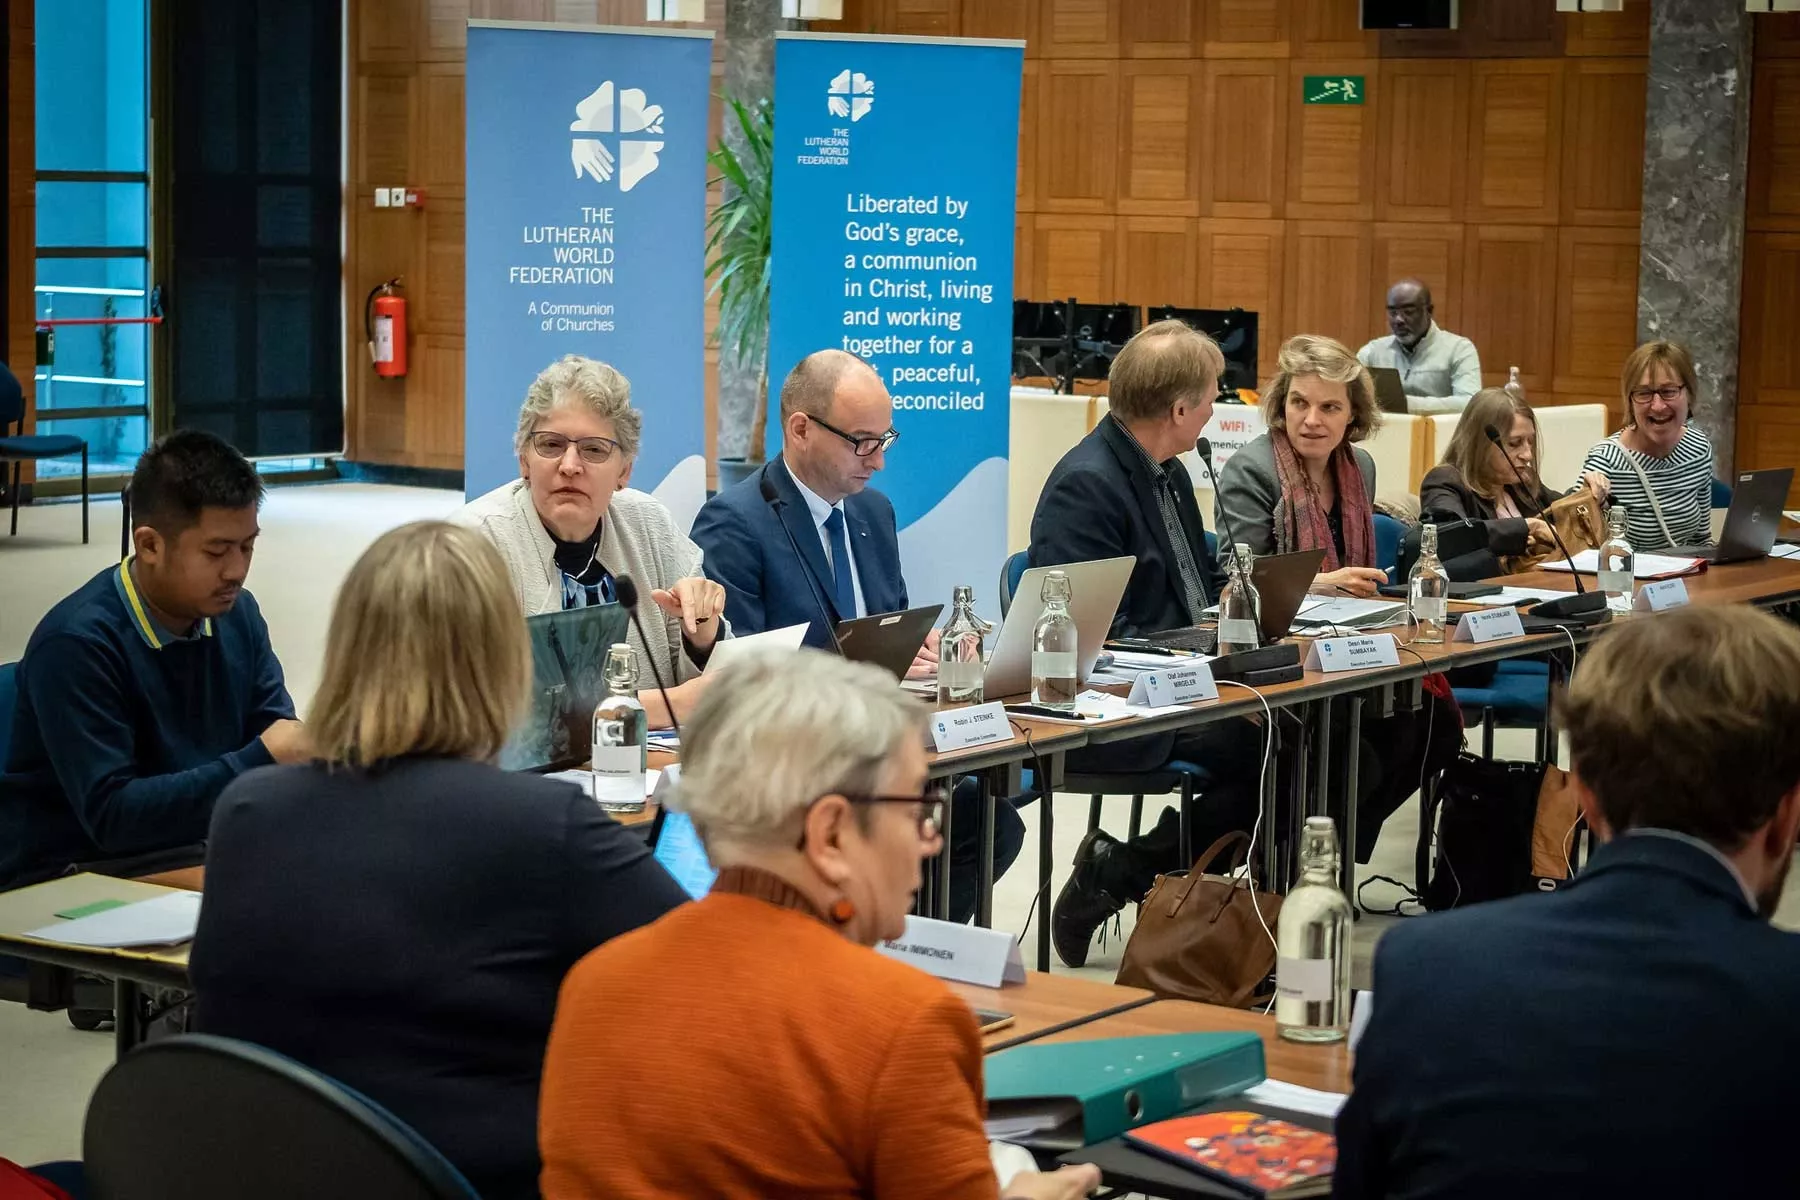   Meeting of the Executive Committee of The Lutheran World Federation at the Ecumenical Center, Geneva (Switzerland), 20-22 November 2019. Photo: LWF/S. Gallay